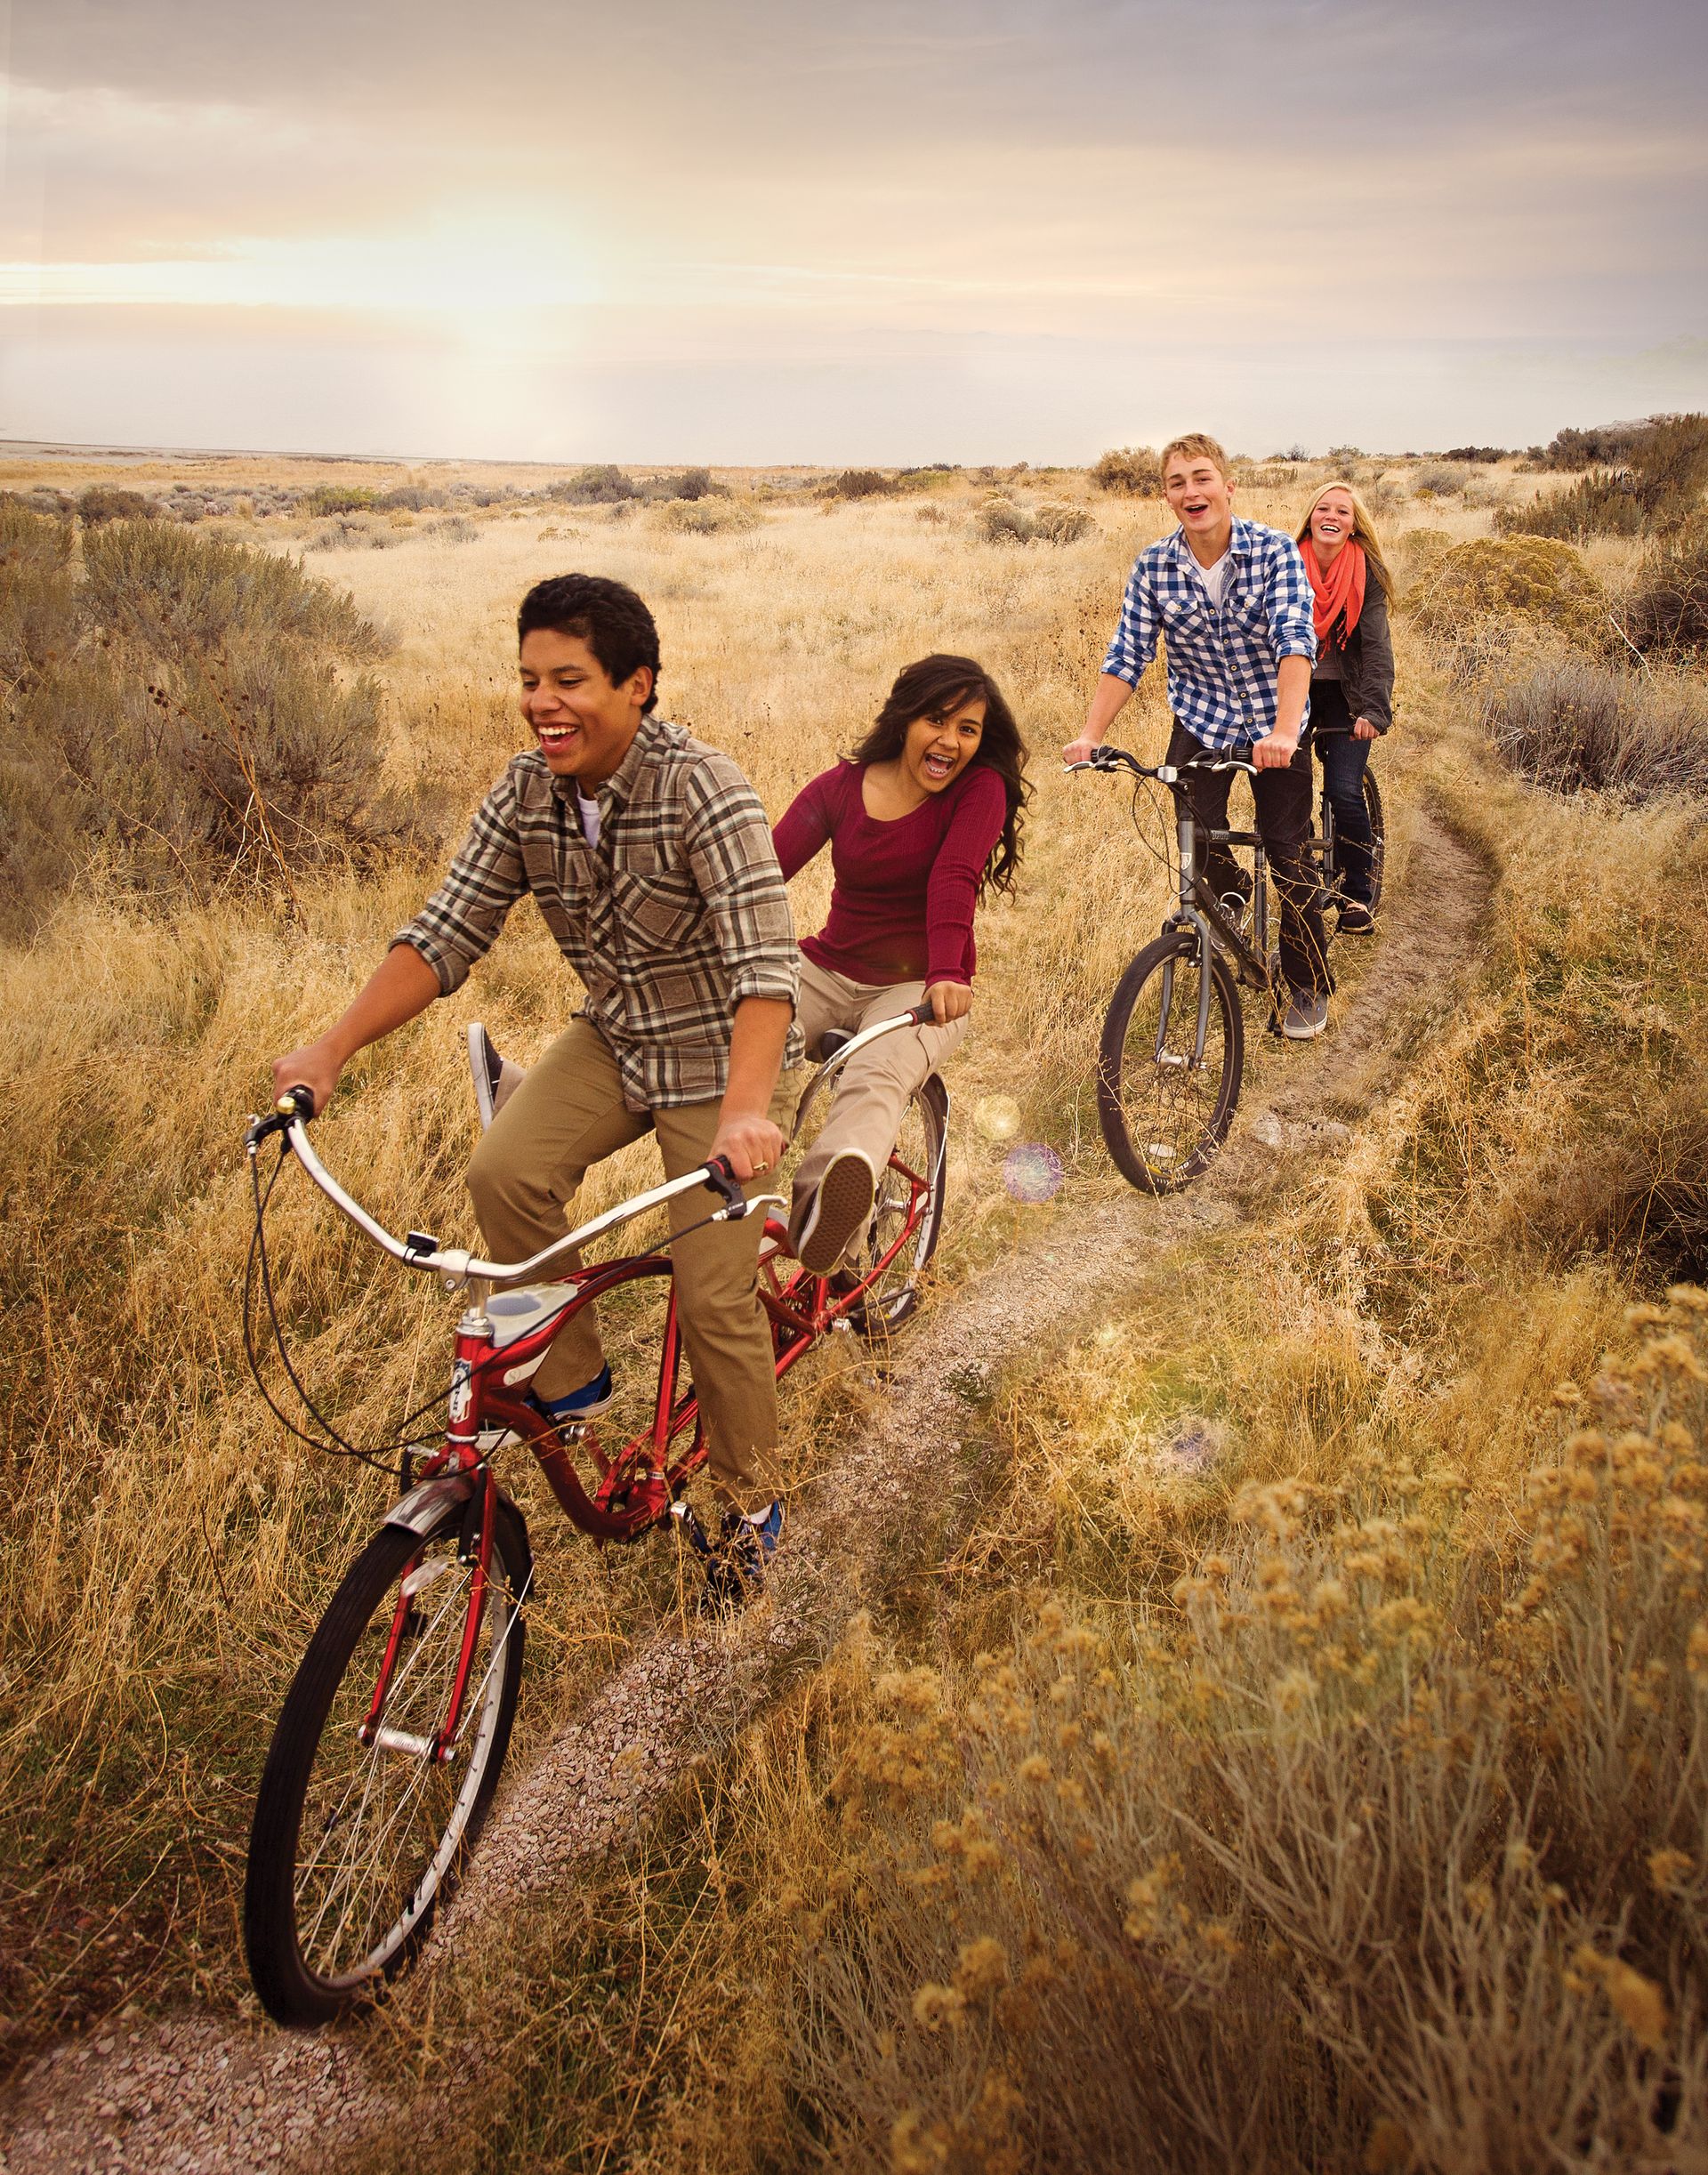 Two couples riding tandem bikes down a narrow path.